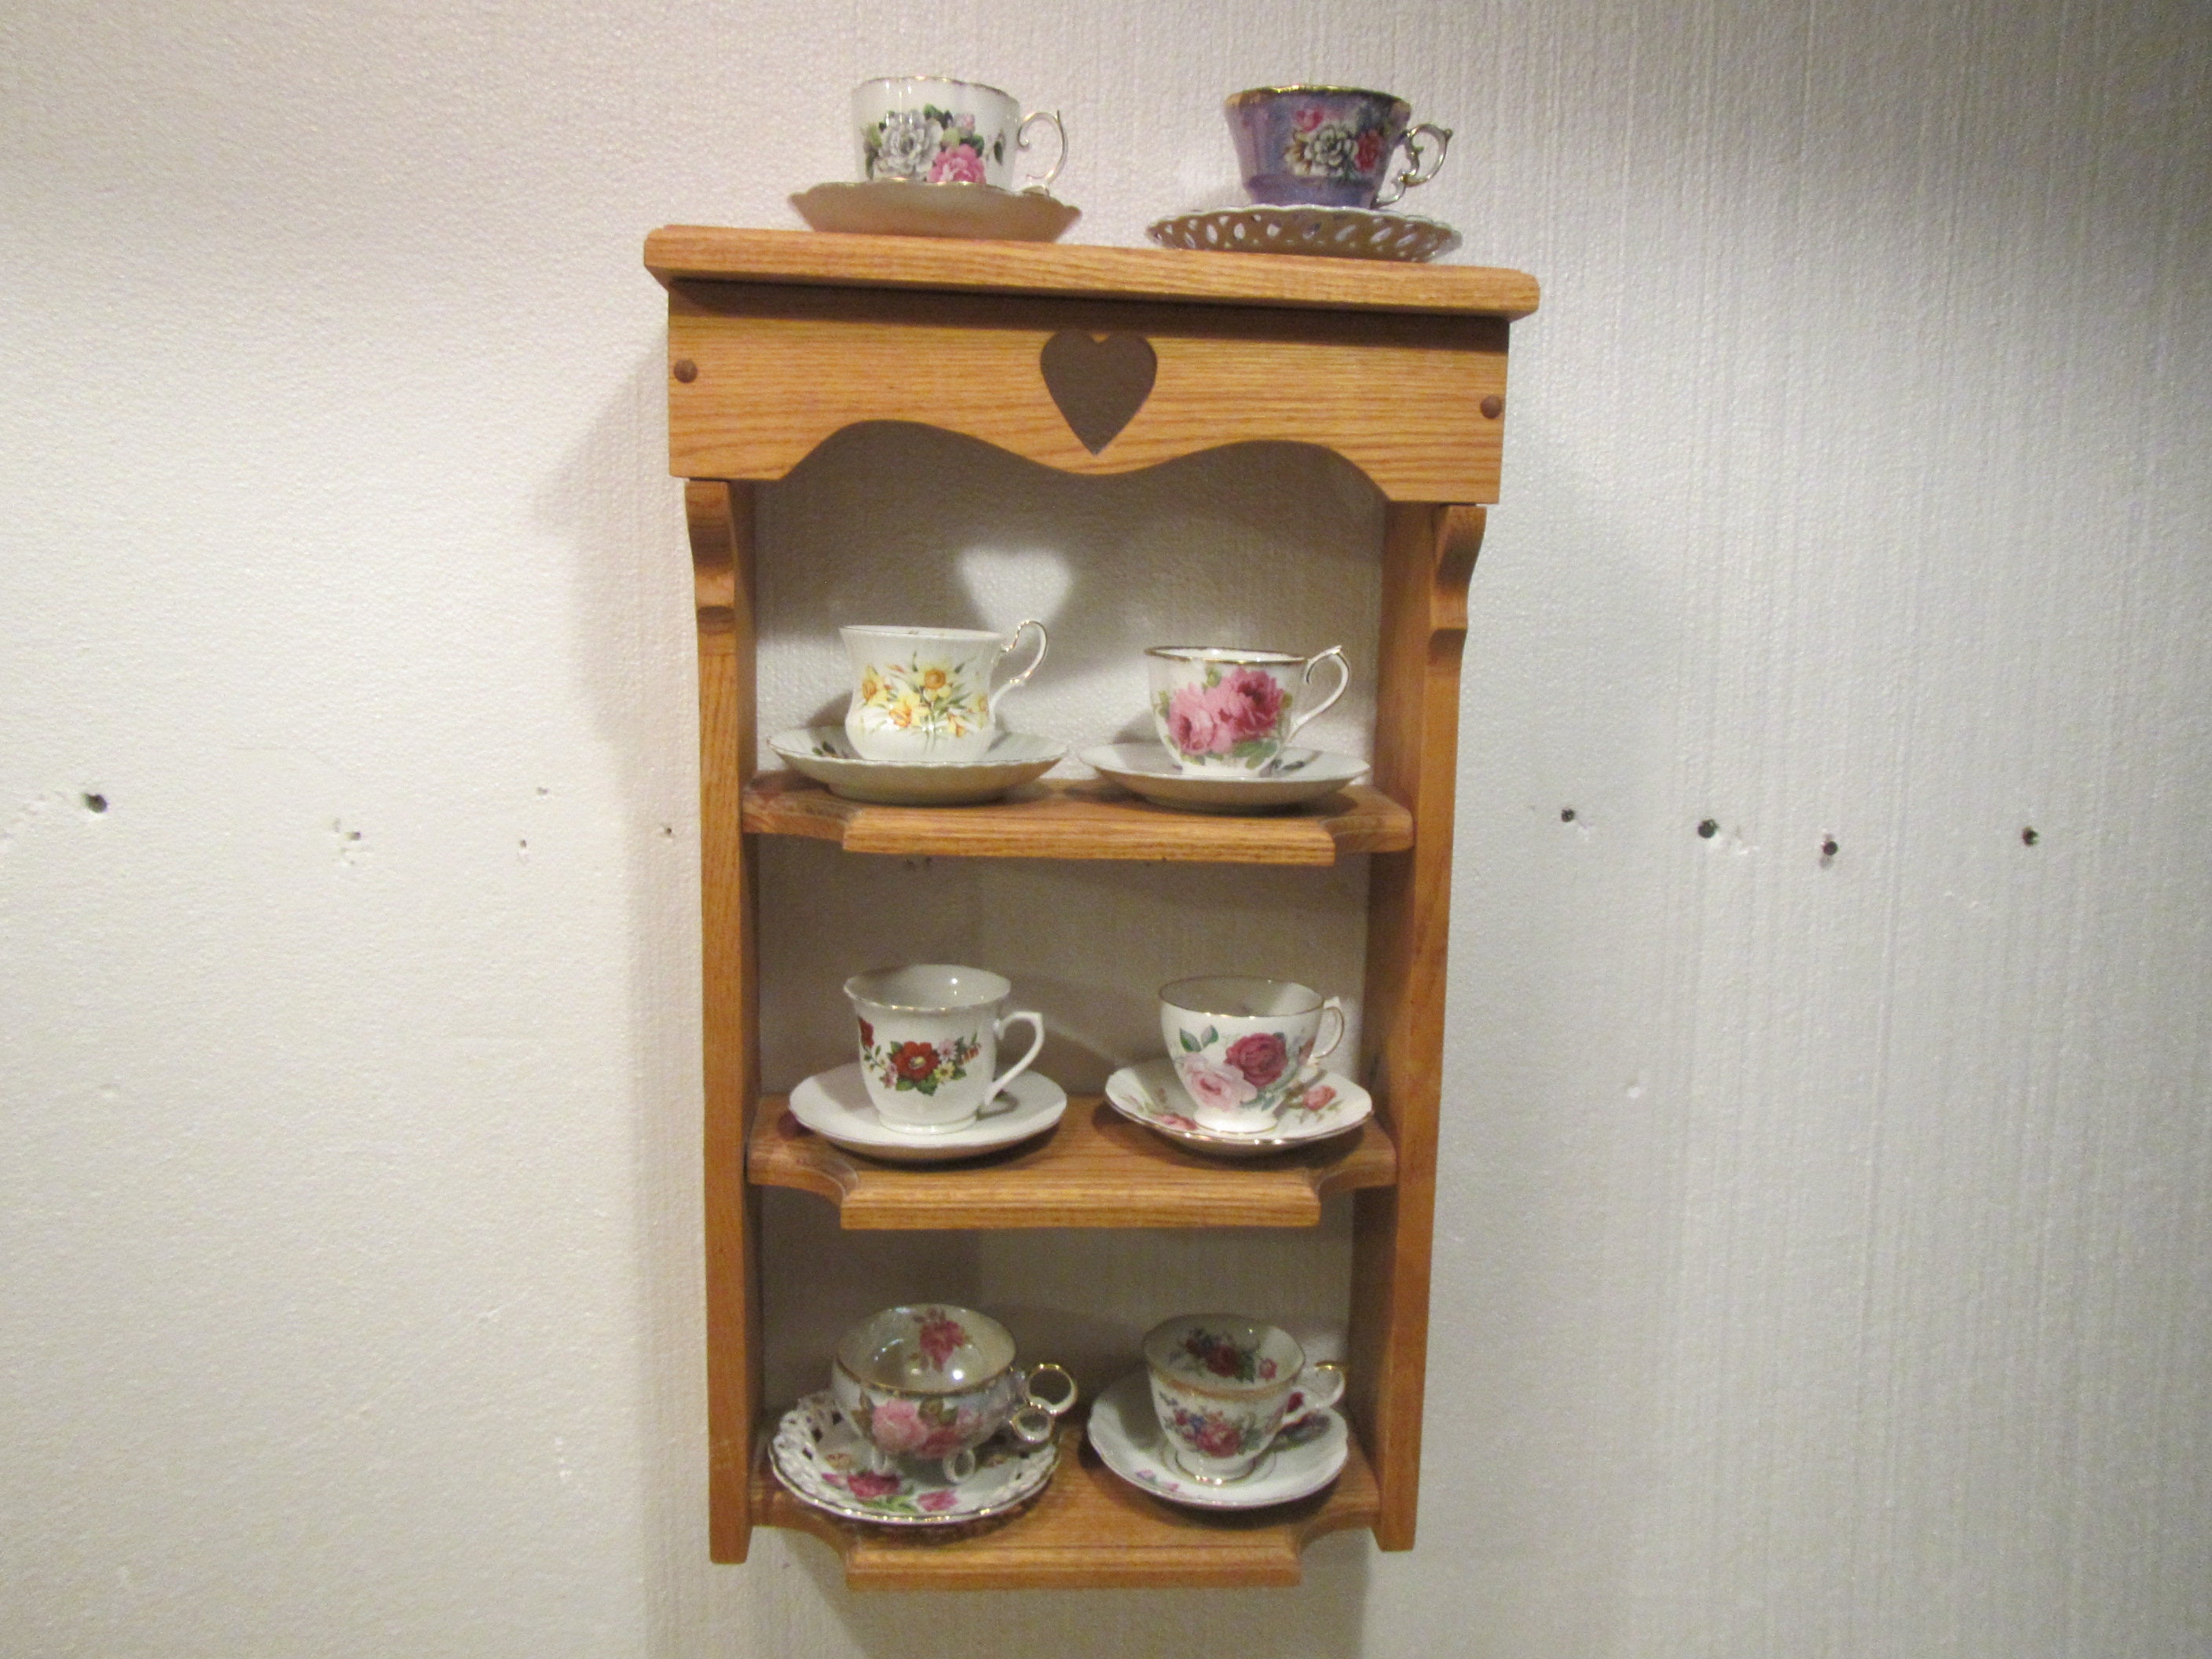  Tea Cup and Saucer Plate Rack and Kitchen Display